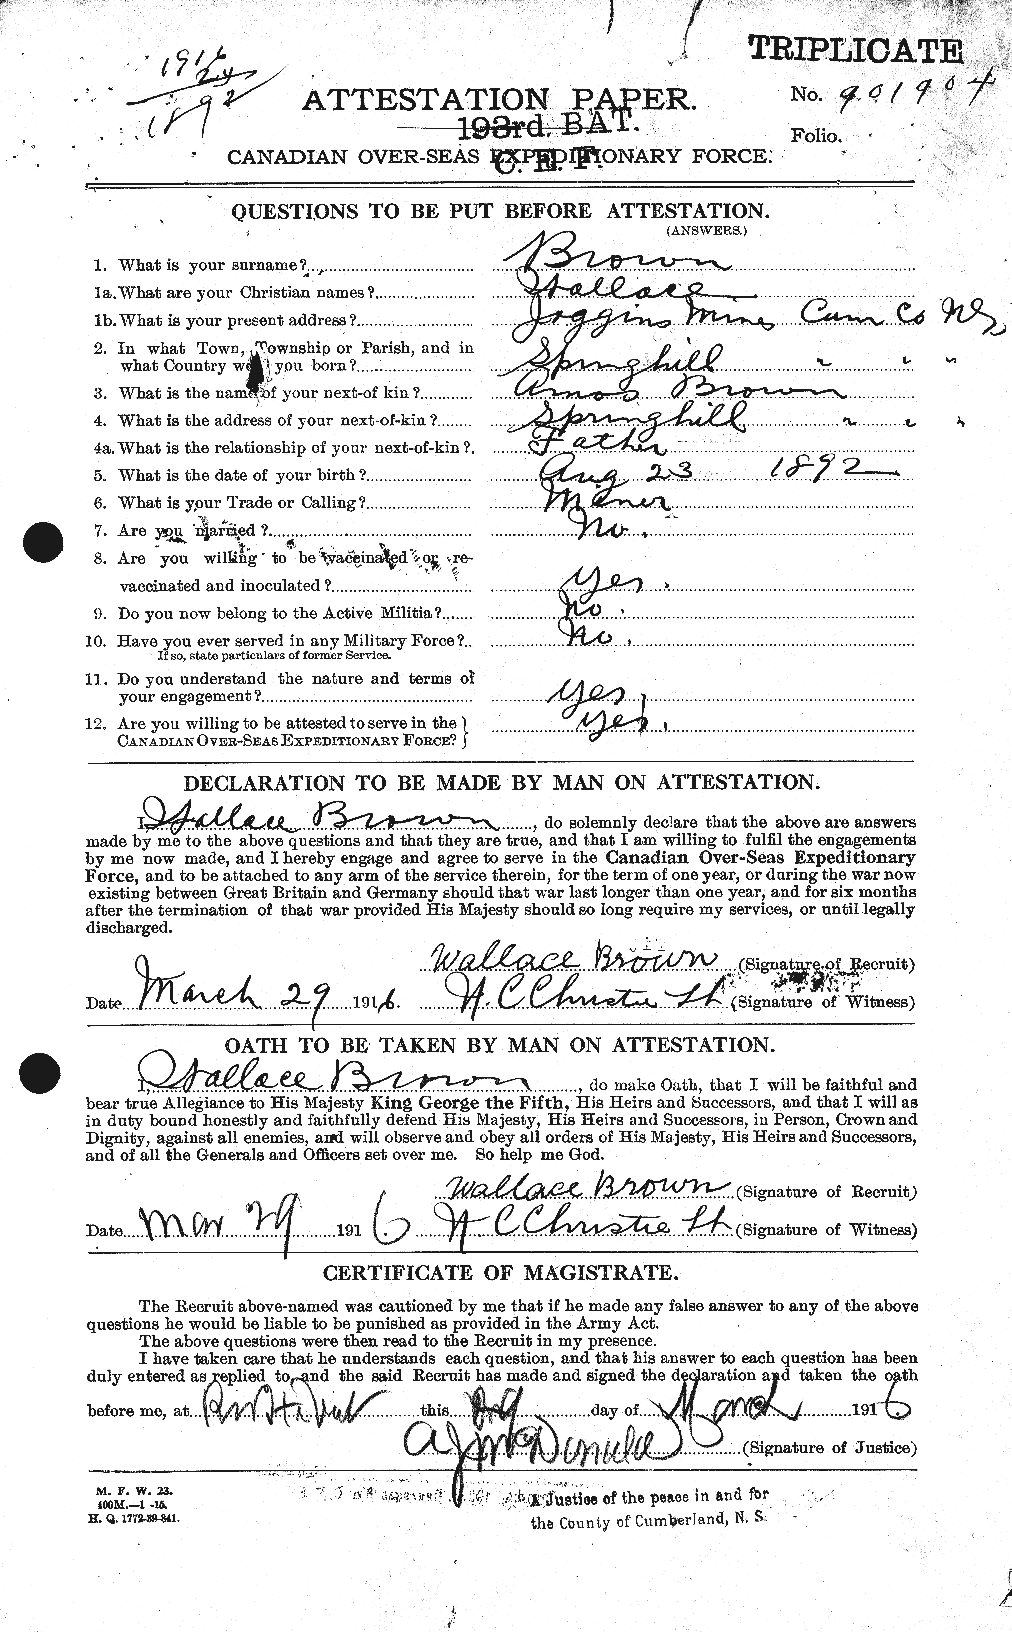 Personnel Records of the First World War - CEF 266628a